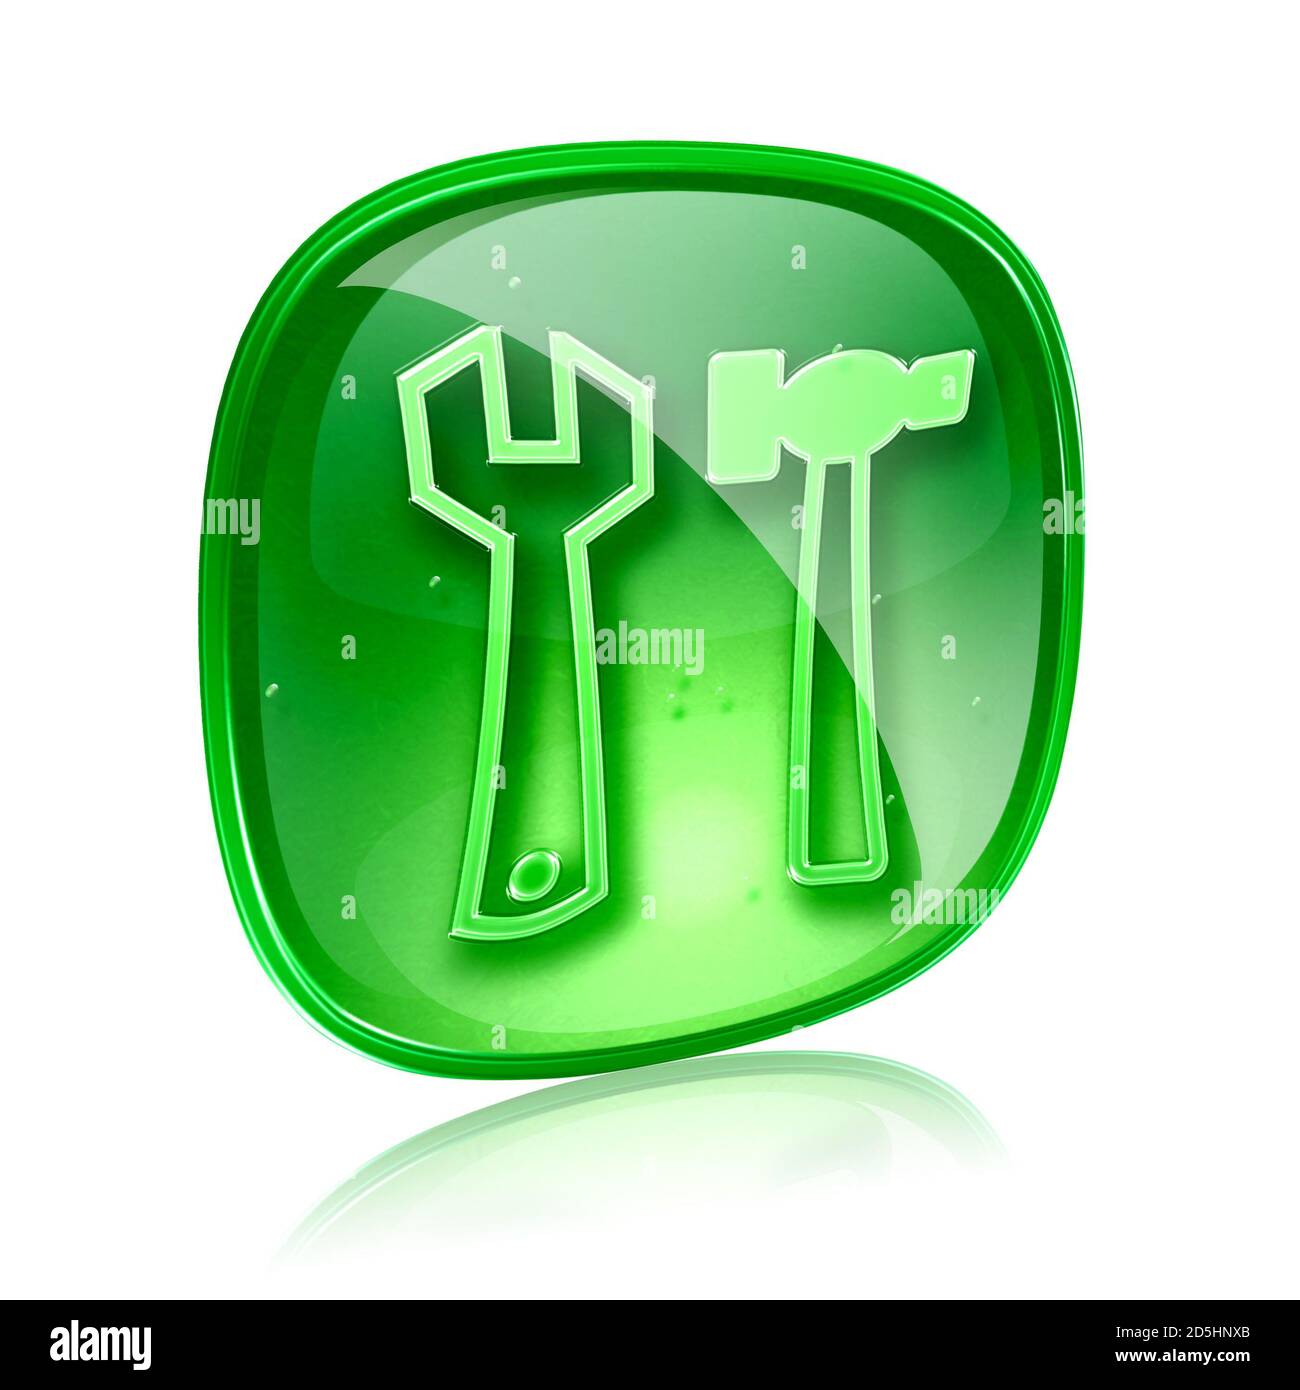 Tools icon green glass, isolated on white background. Stock Photo